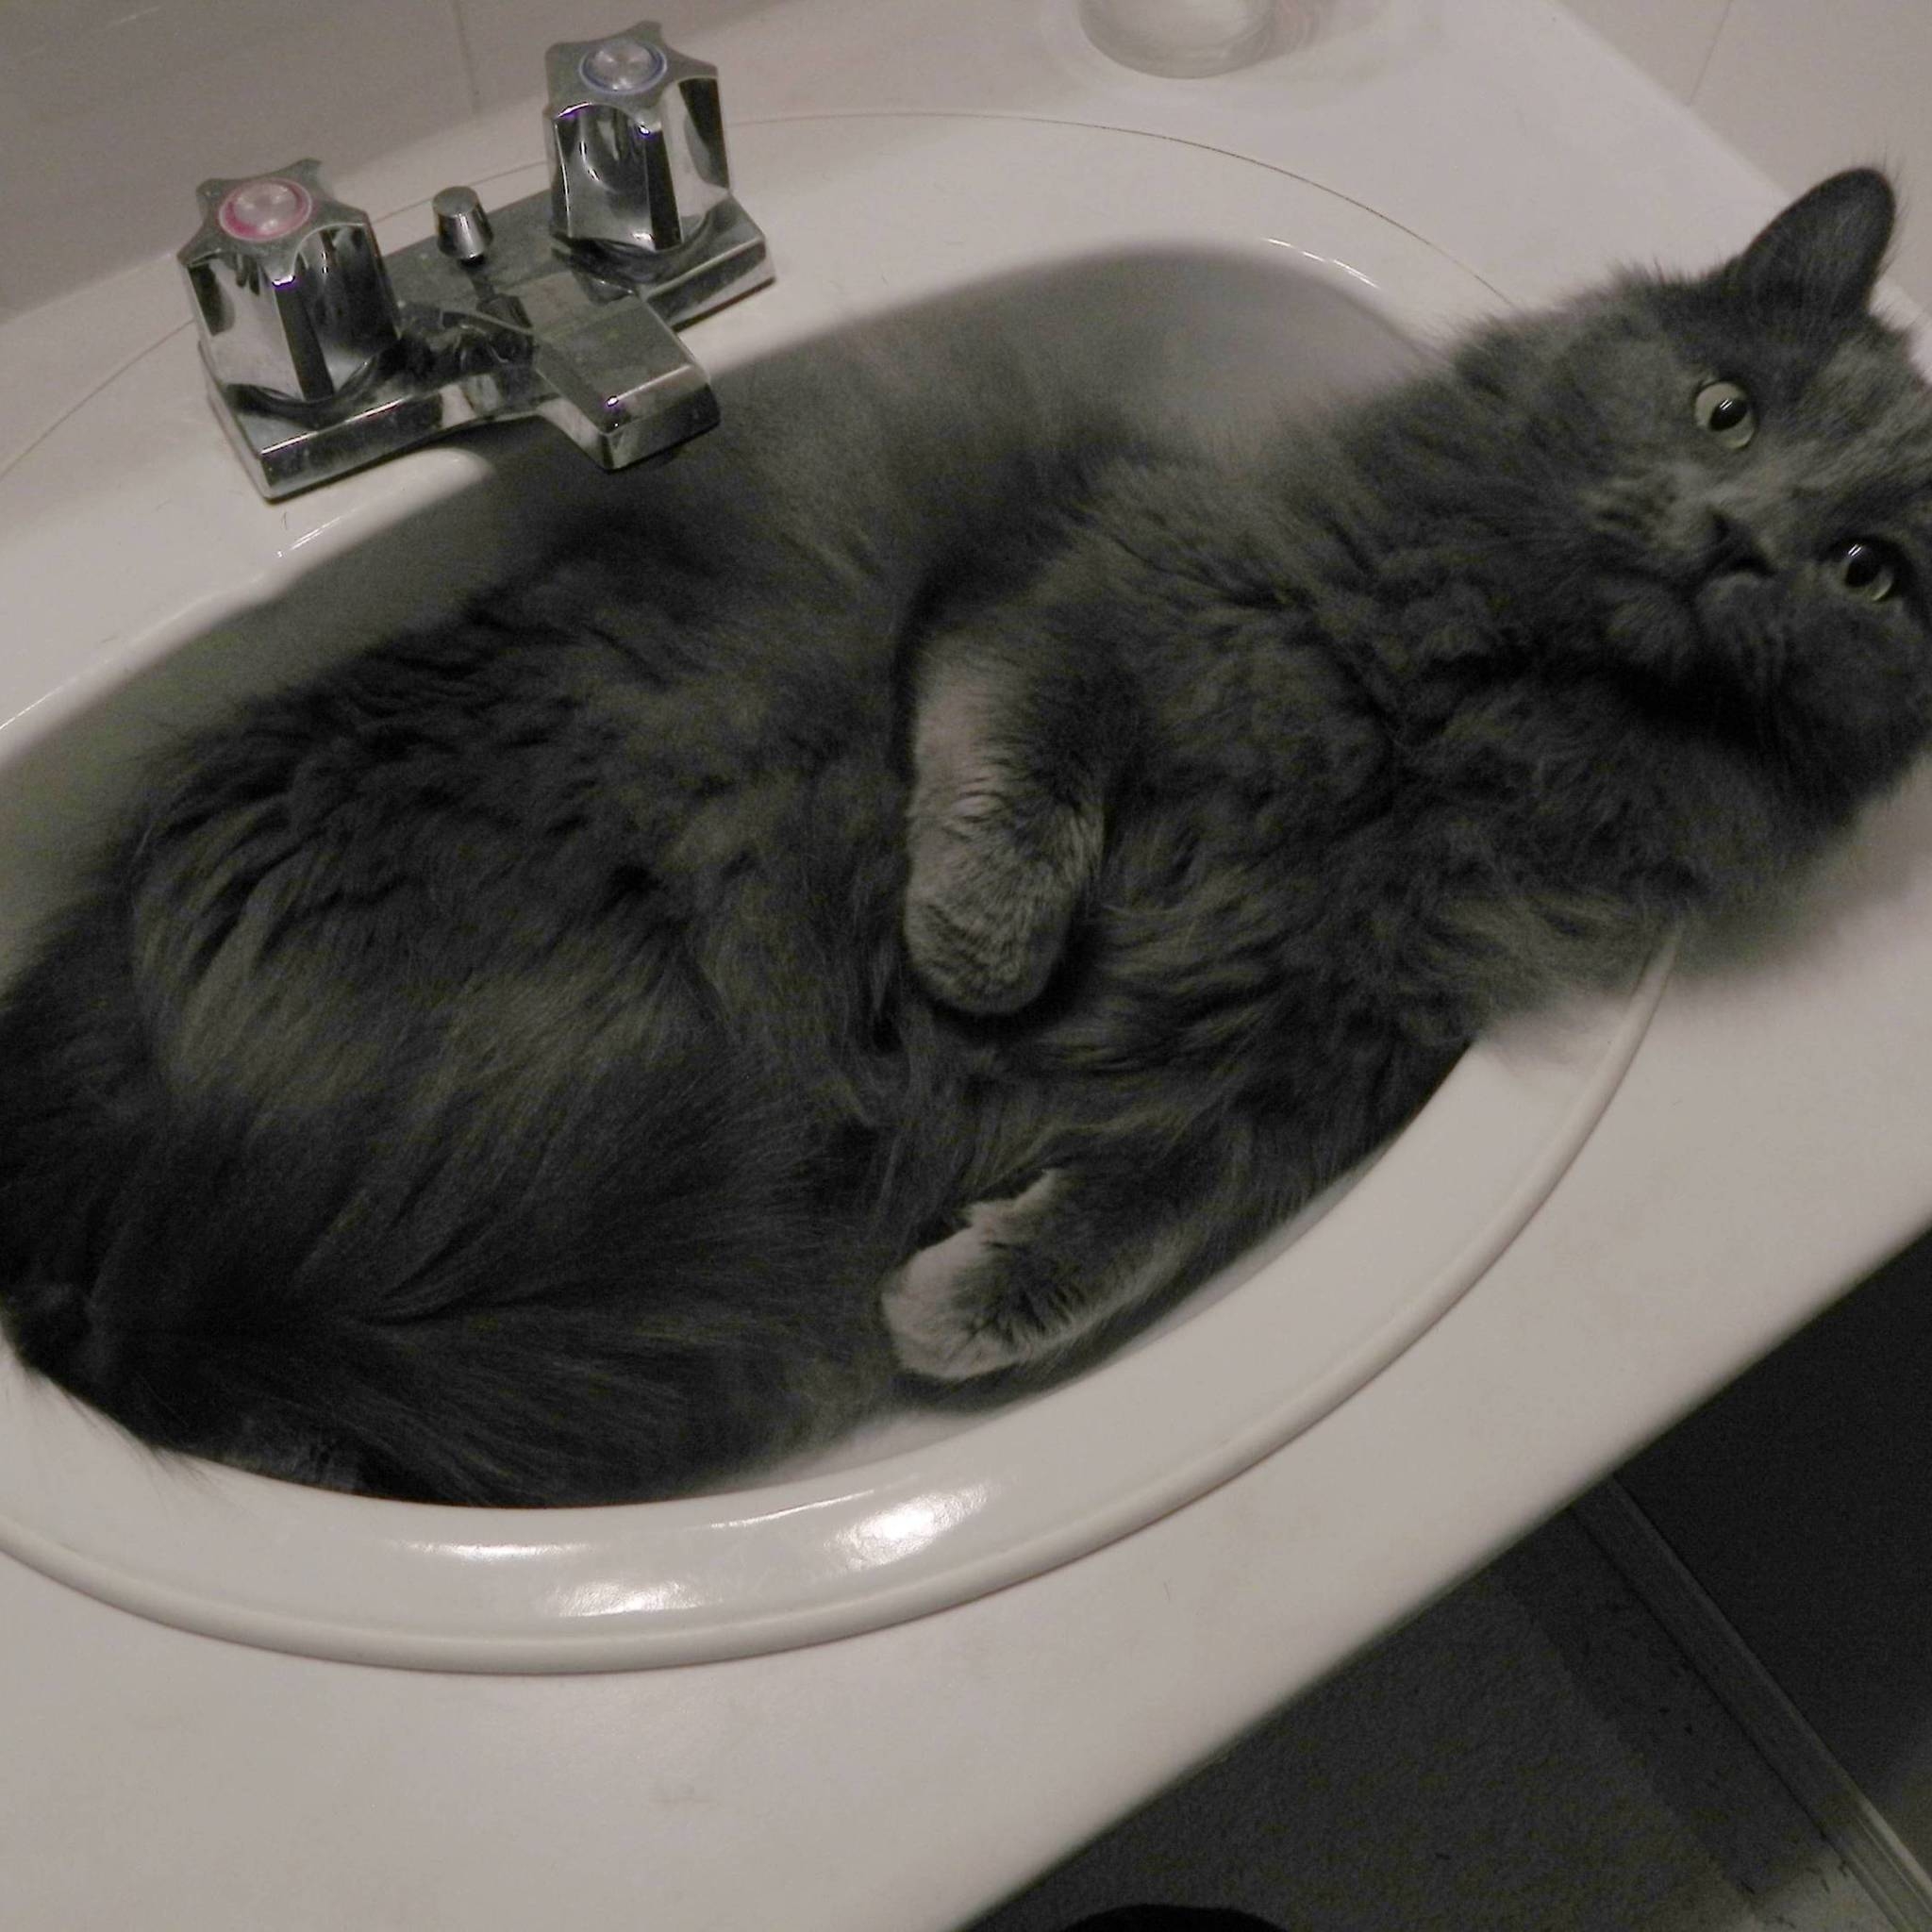 Nebelung Cat in Sink for 2048 x 2048 New iPad resolution